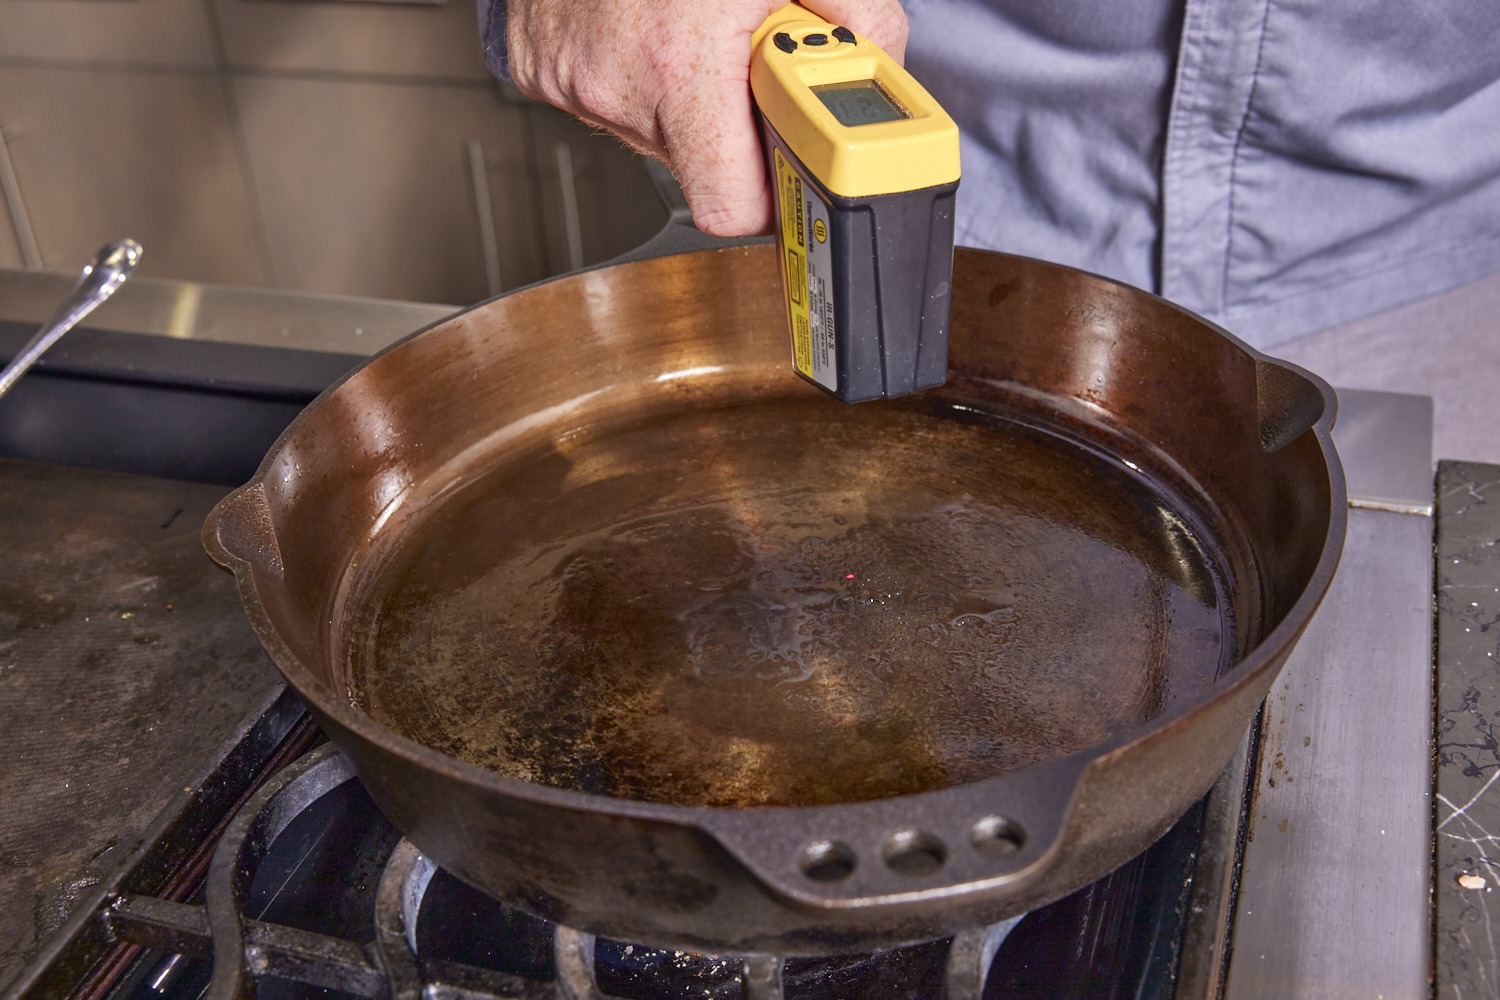 Temping the pan with an IR thermoemter